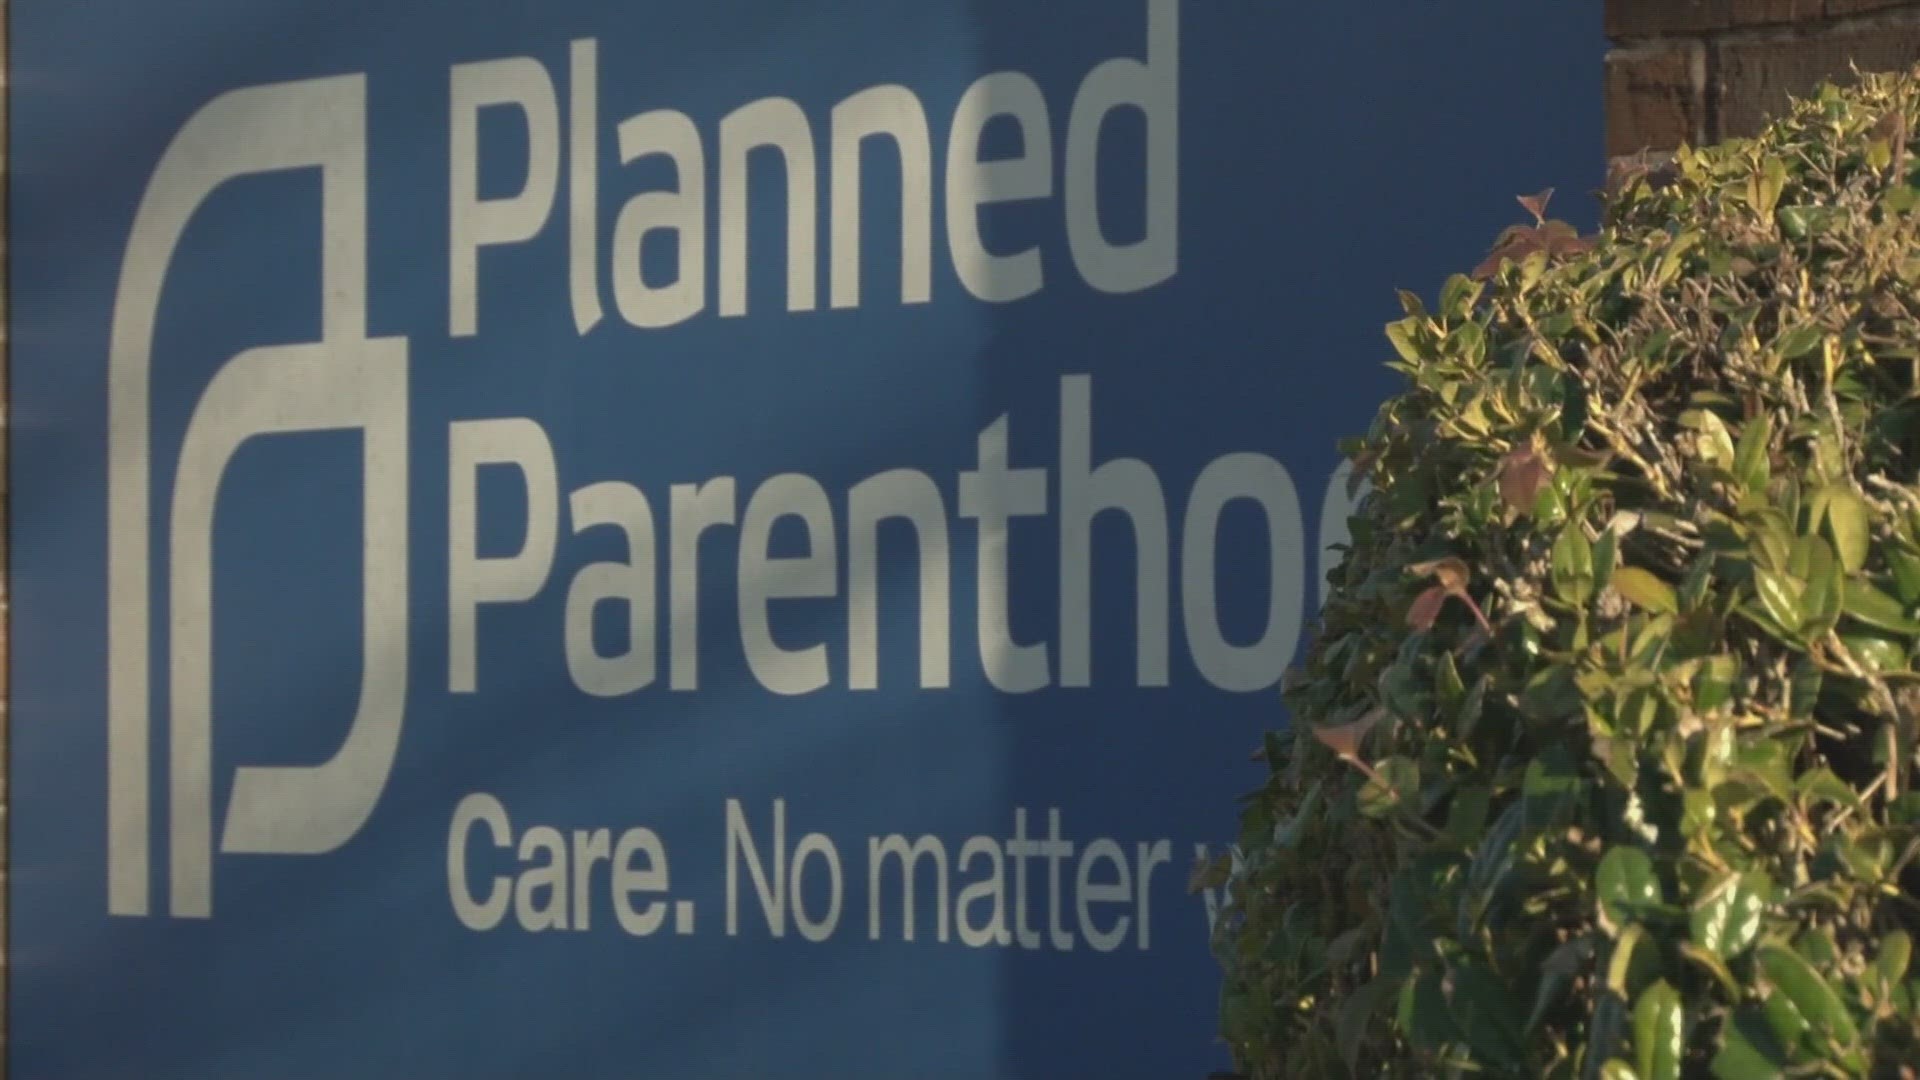 Funding was brought back through the Virginia League for Planned Parenthood and another organization after Tennessee fell out of compliance with the federal program